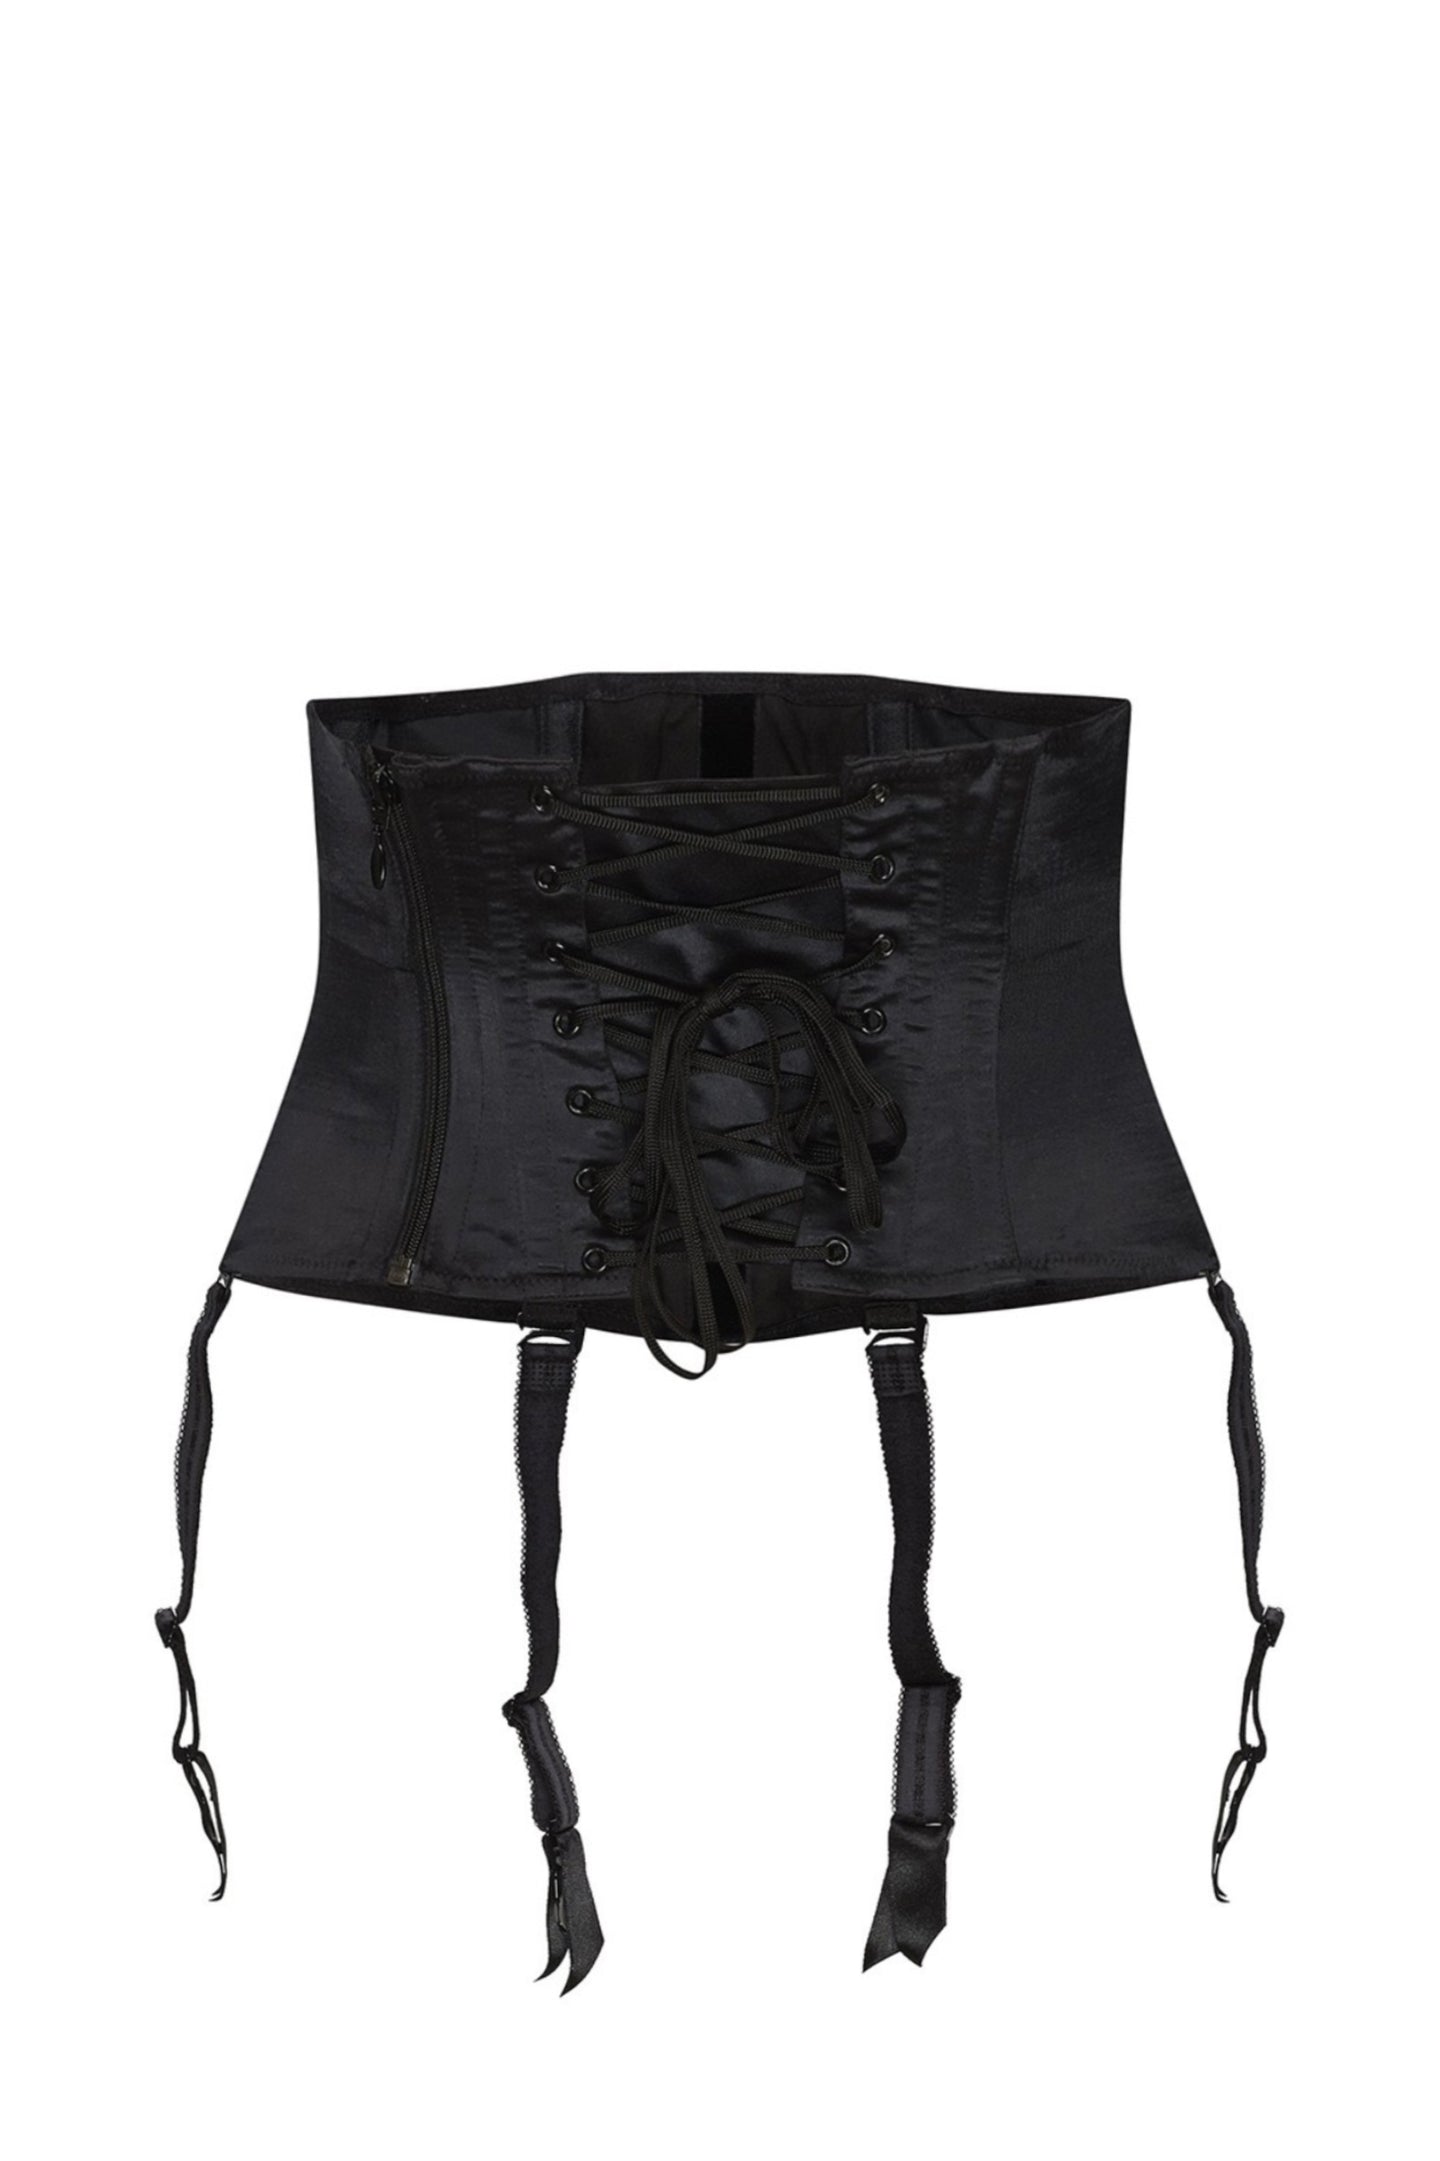 This is a fabulous waspie. Its clever boning draws in the waist with its strong lacing at the back, by the way, making a very attractive rear view! The lacing back also allows for extra cms when sizing. The zip at side gives an easy release. The suspenders are removable. allowing for wear both and inner and outerwear.